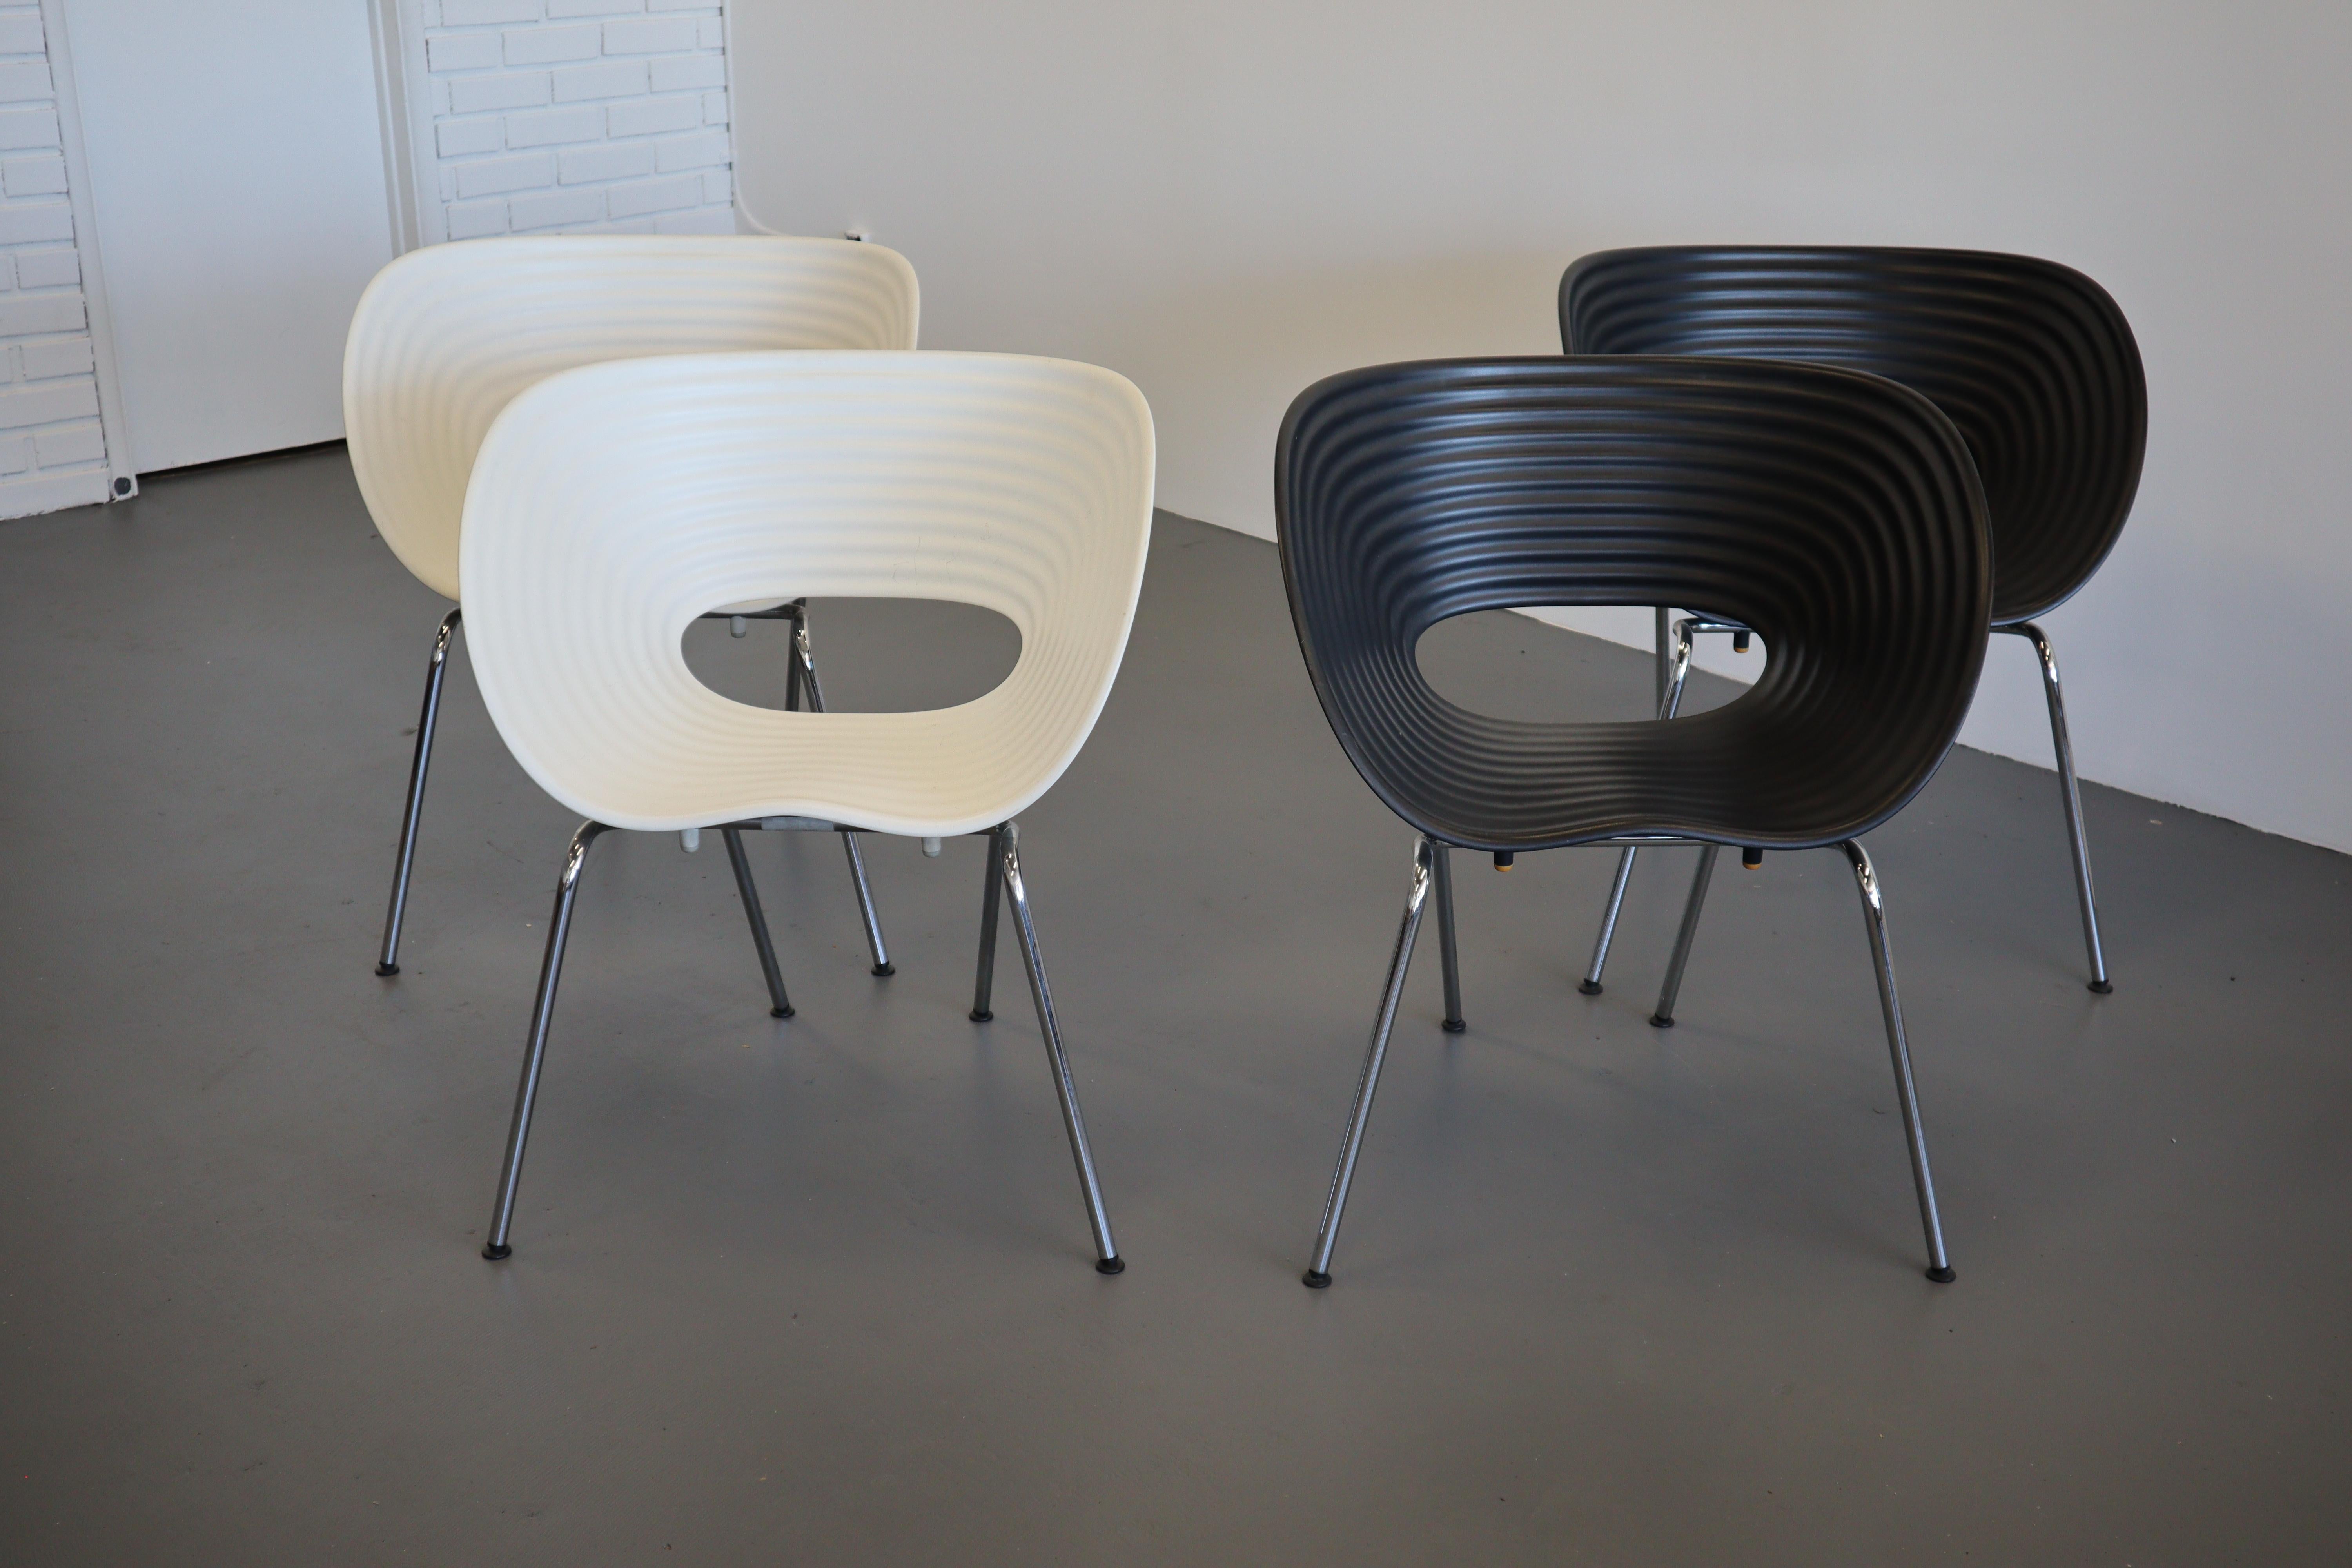 Dual use ribbed scoop seating with oval aperture and chrome tubular legs. This set of four black and white chairs remains as one of the most recognized designs by Tom Vac and Ron Arad for Vitra. Stackable and extremely durable, these are great for